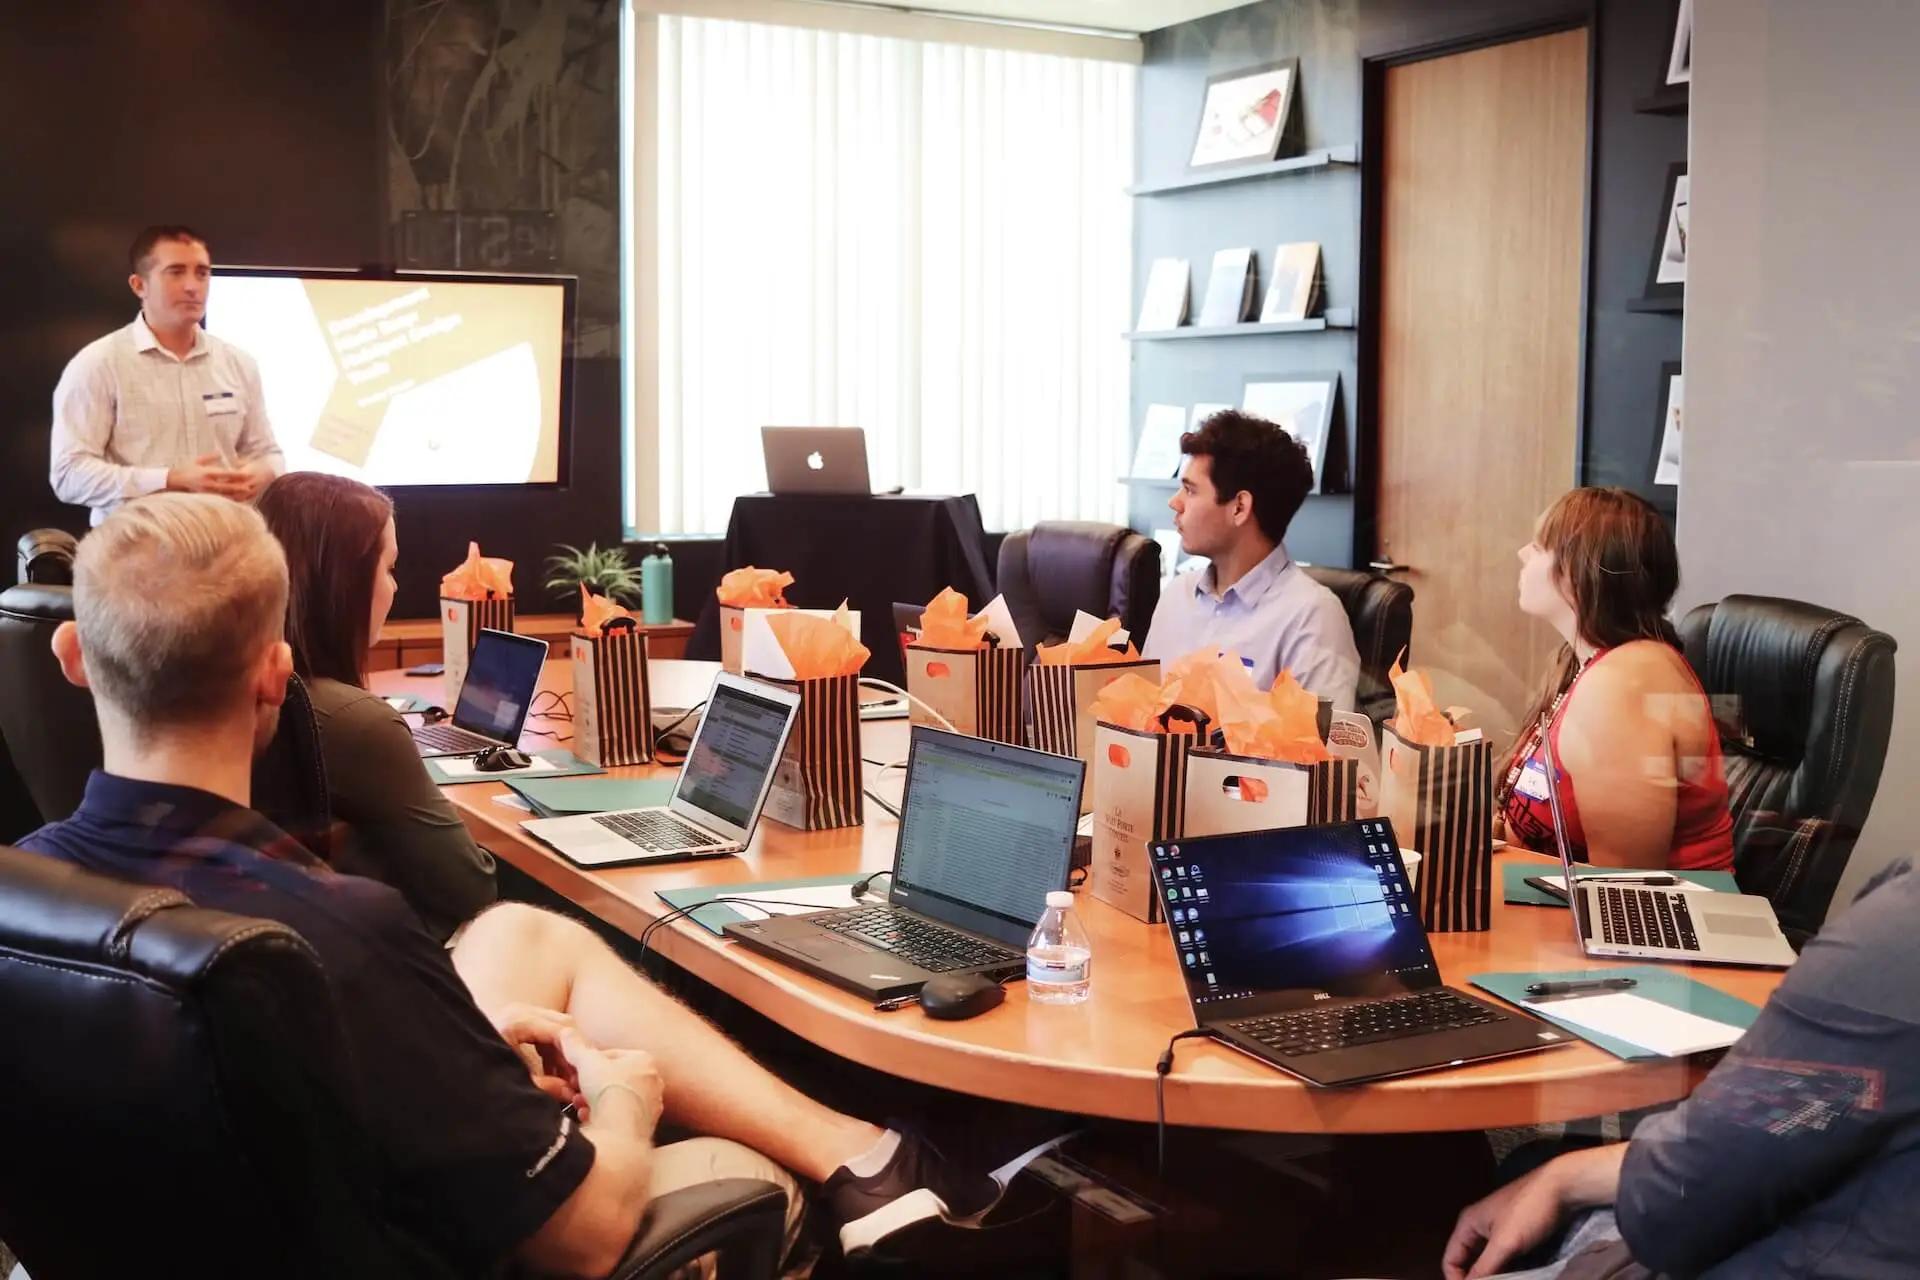 A meeting room with team members with laptops while a fourth presents data.